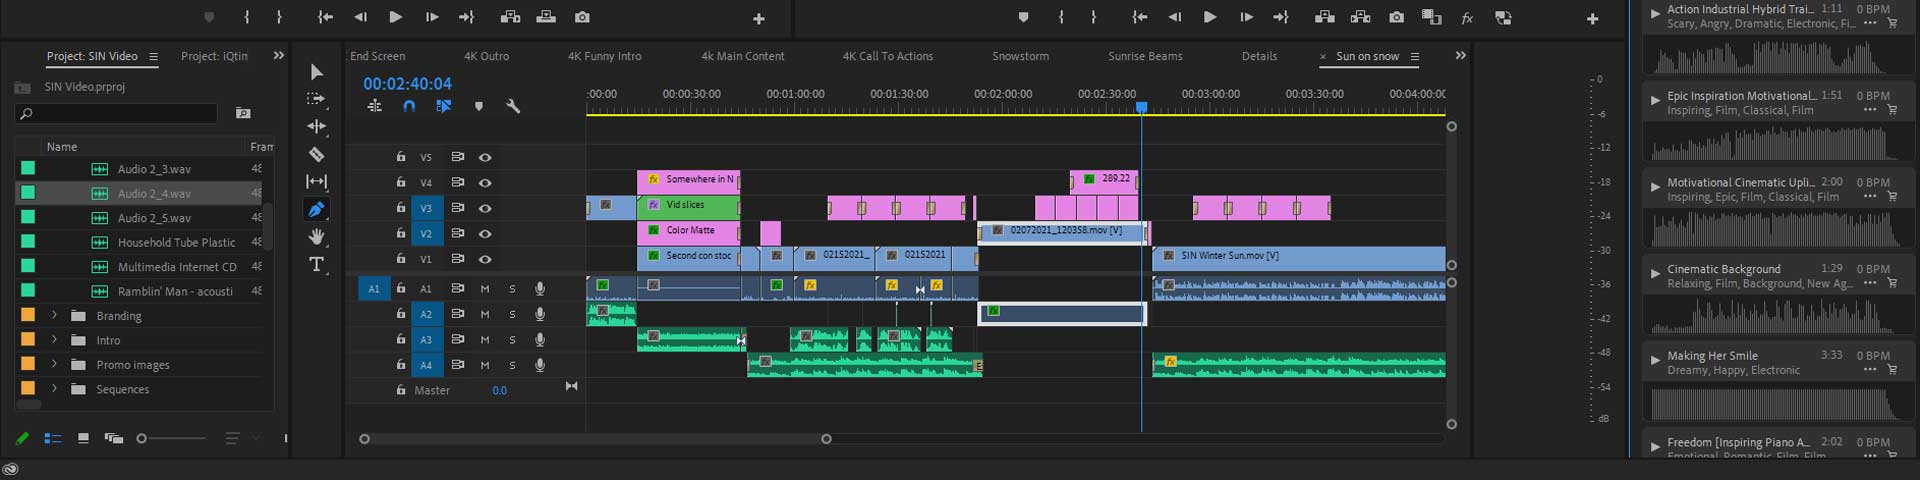 Video editing timeline of an episode of Somewhere In Niagara.